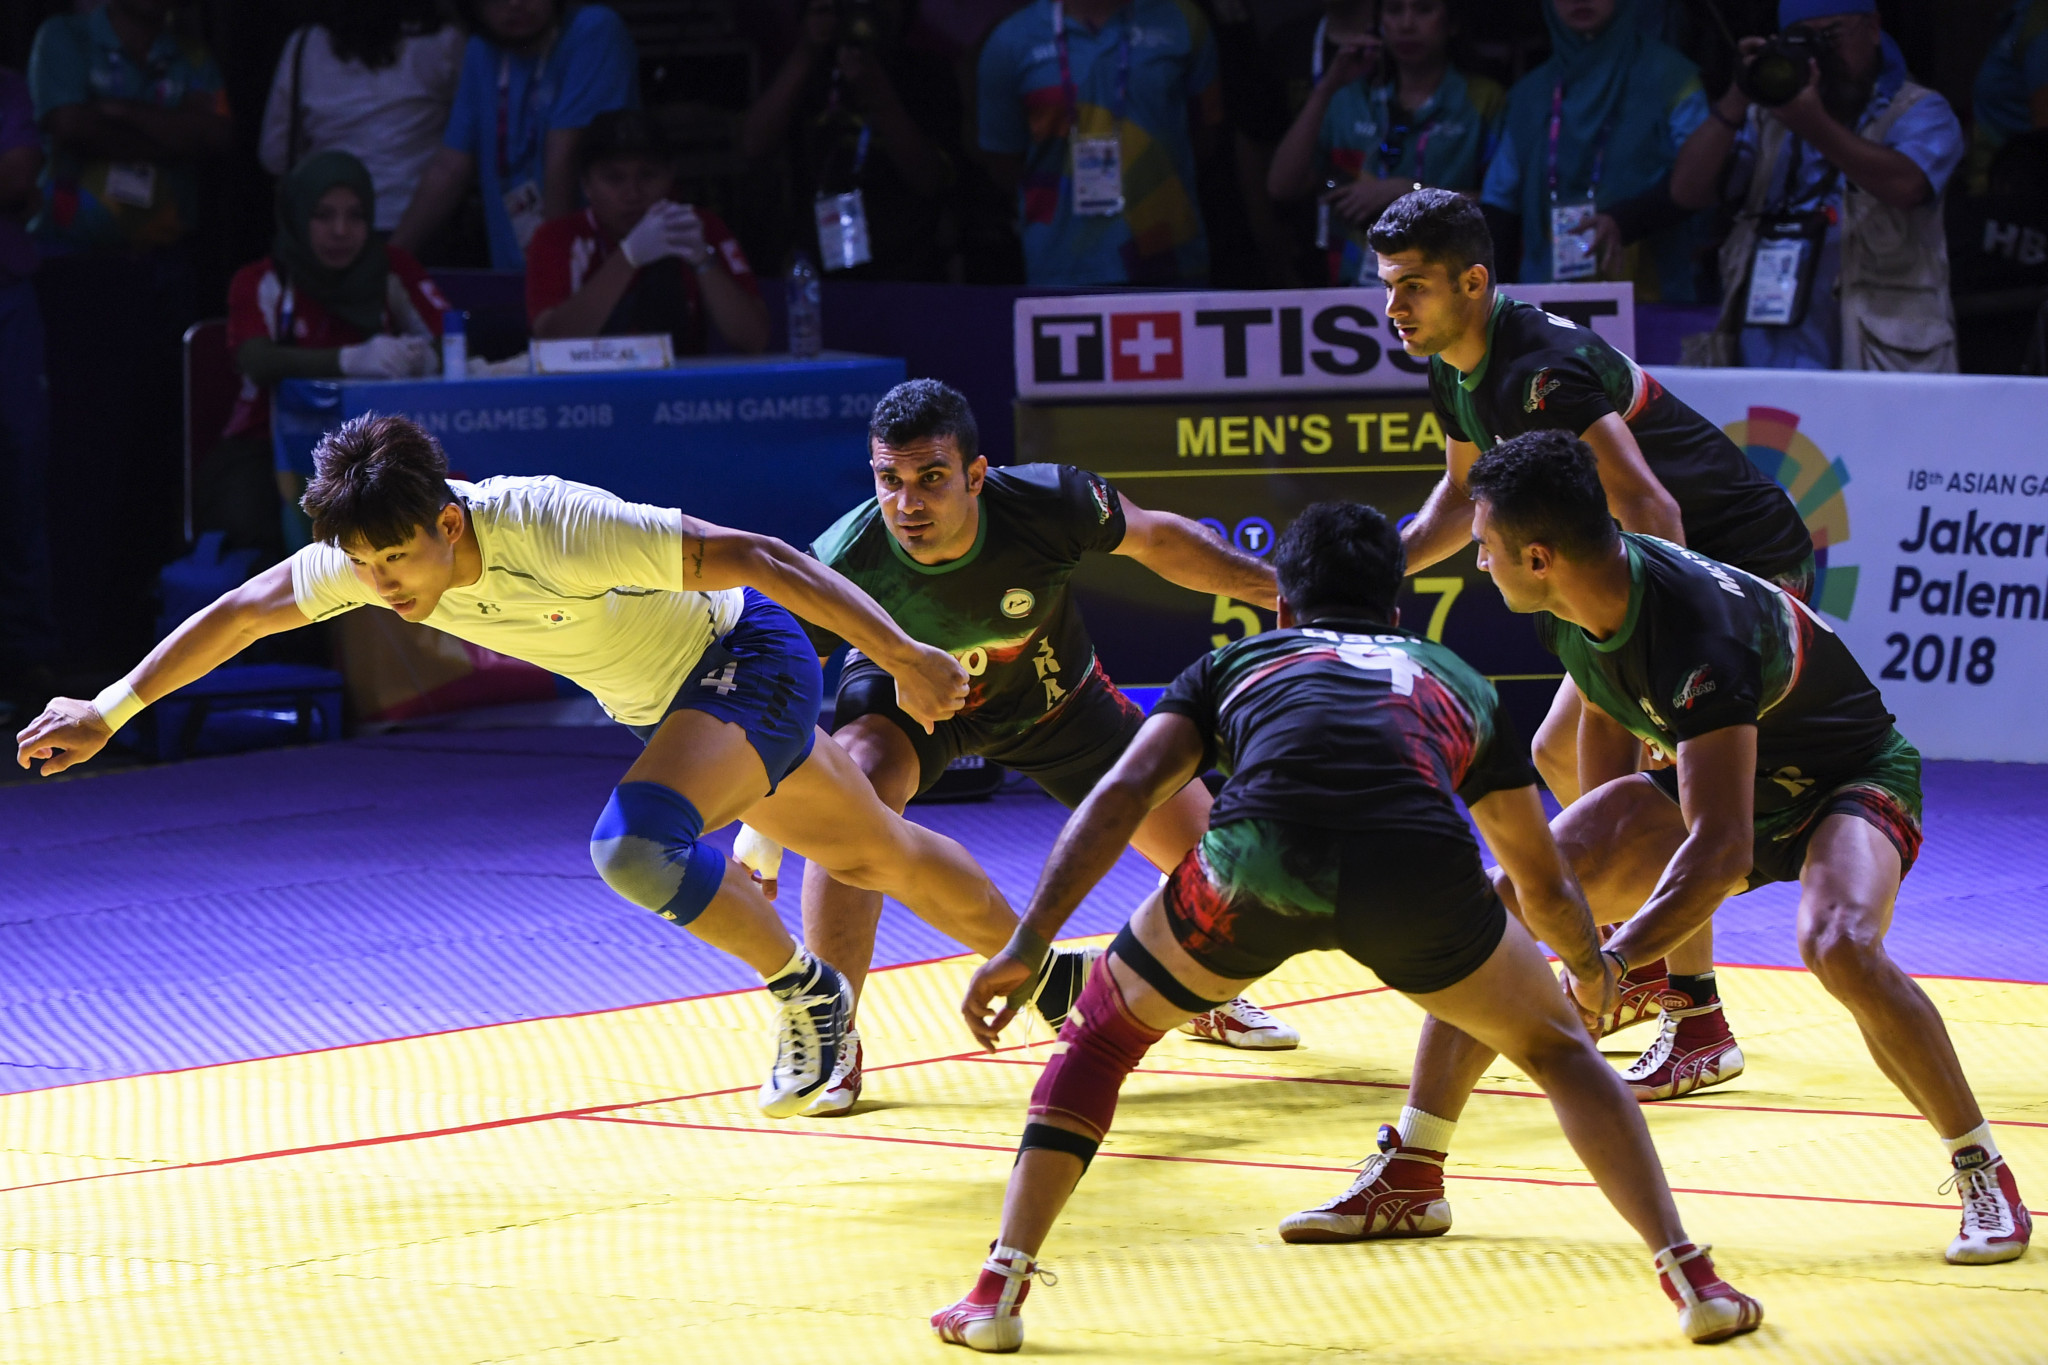 Iran secured a golden double in kabbadi after beating South Korea in the men's team final ©Getty Images